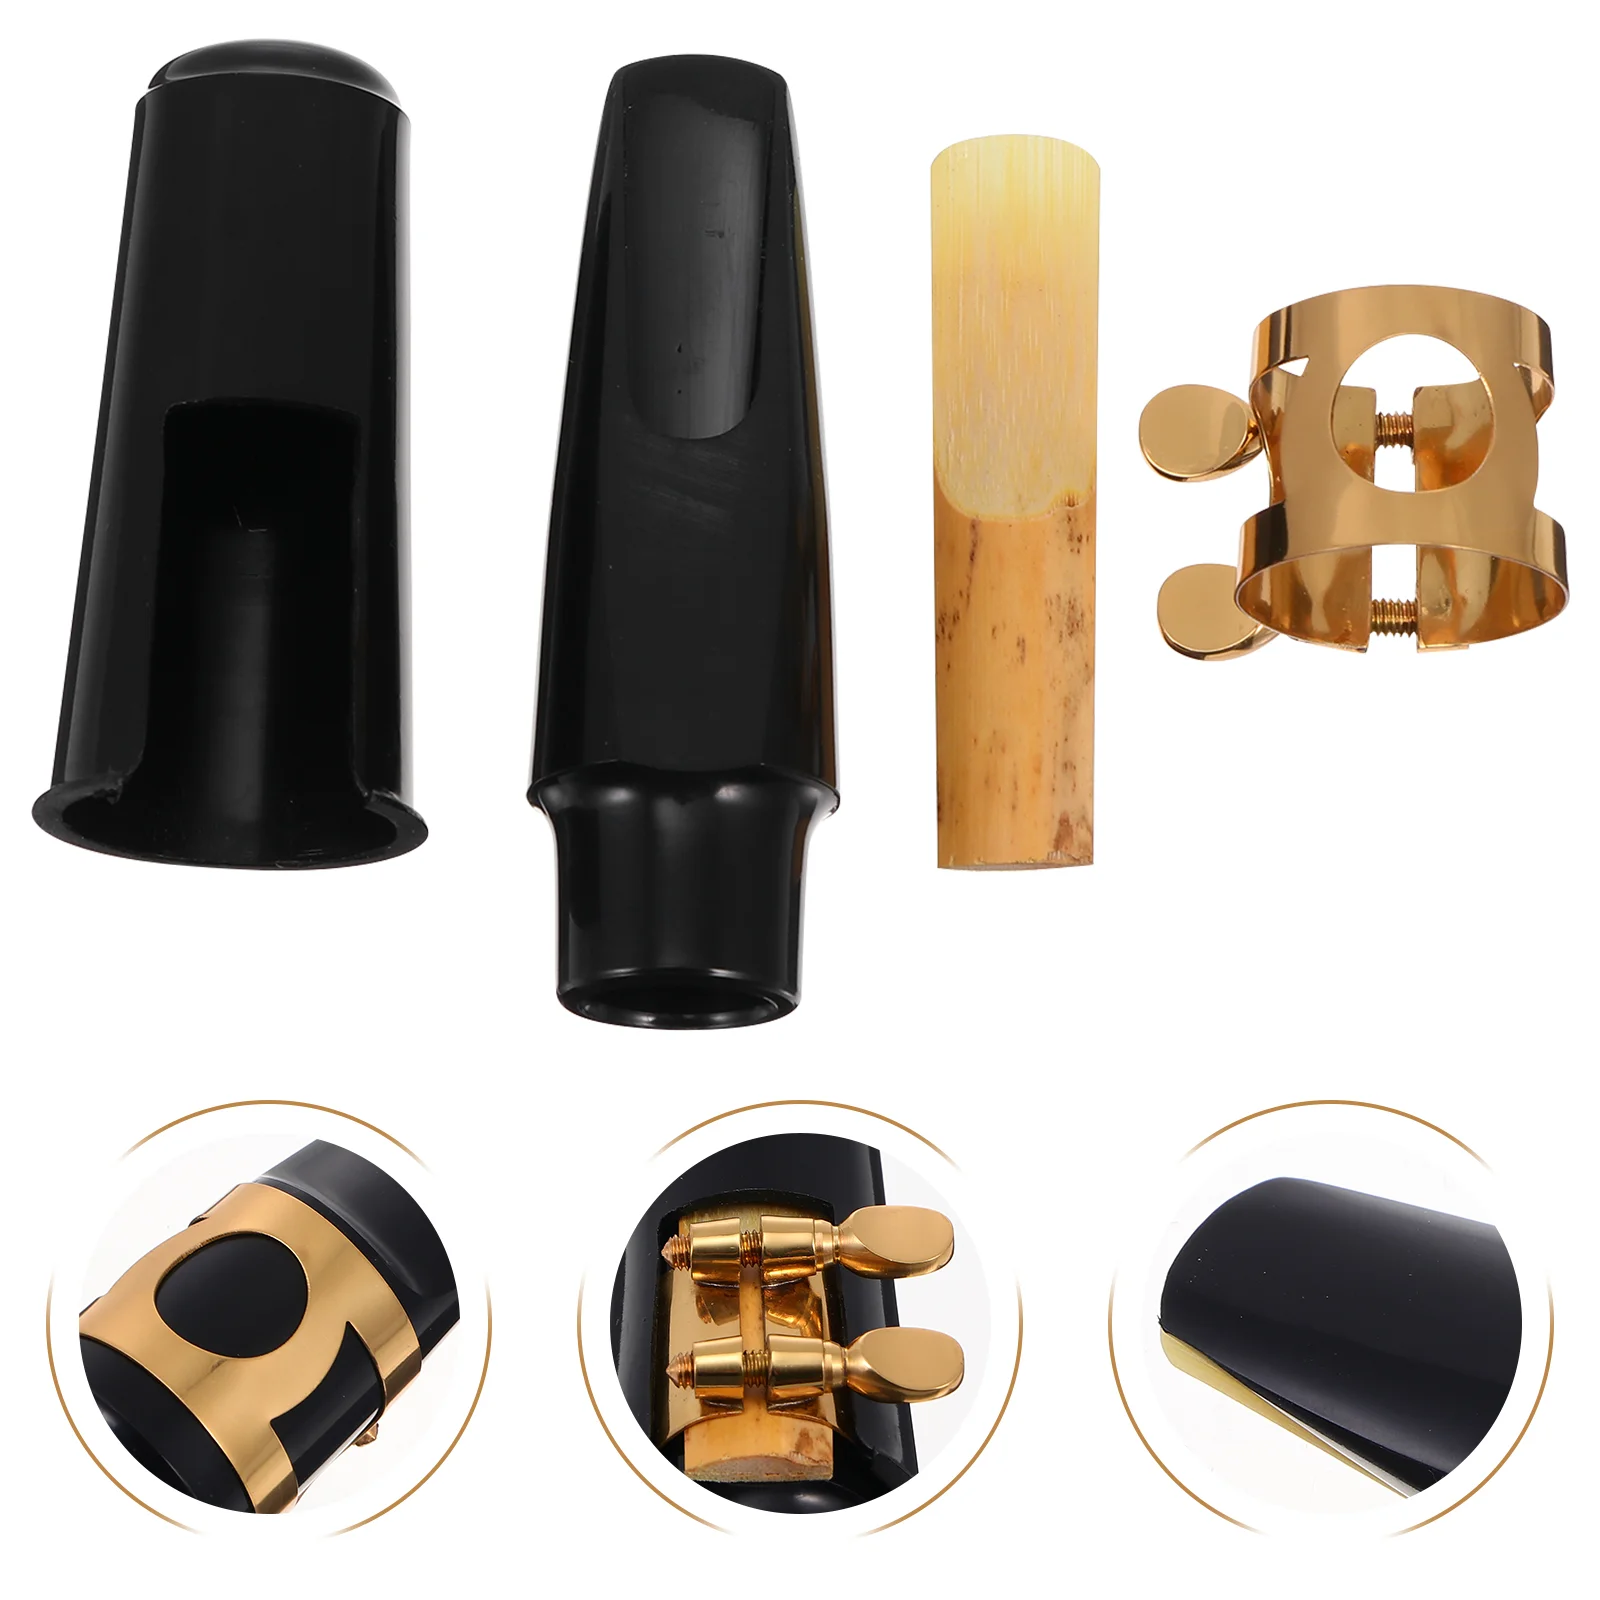 

Saxophone Mouthpiece Alto Sax Accessories Tenor Instrument Ligature Supplies Cover Playing Cap Clarinet Baritone Tool Accessory